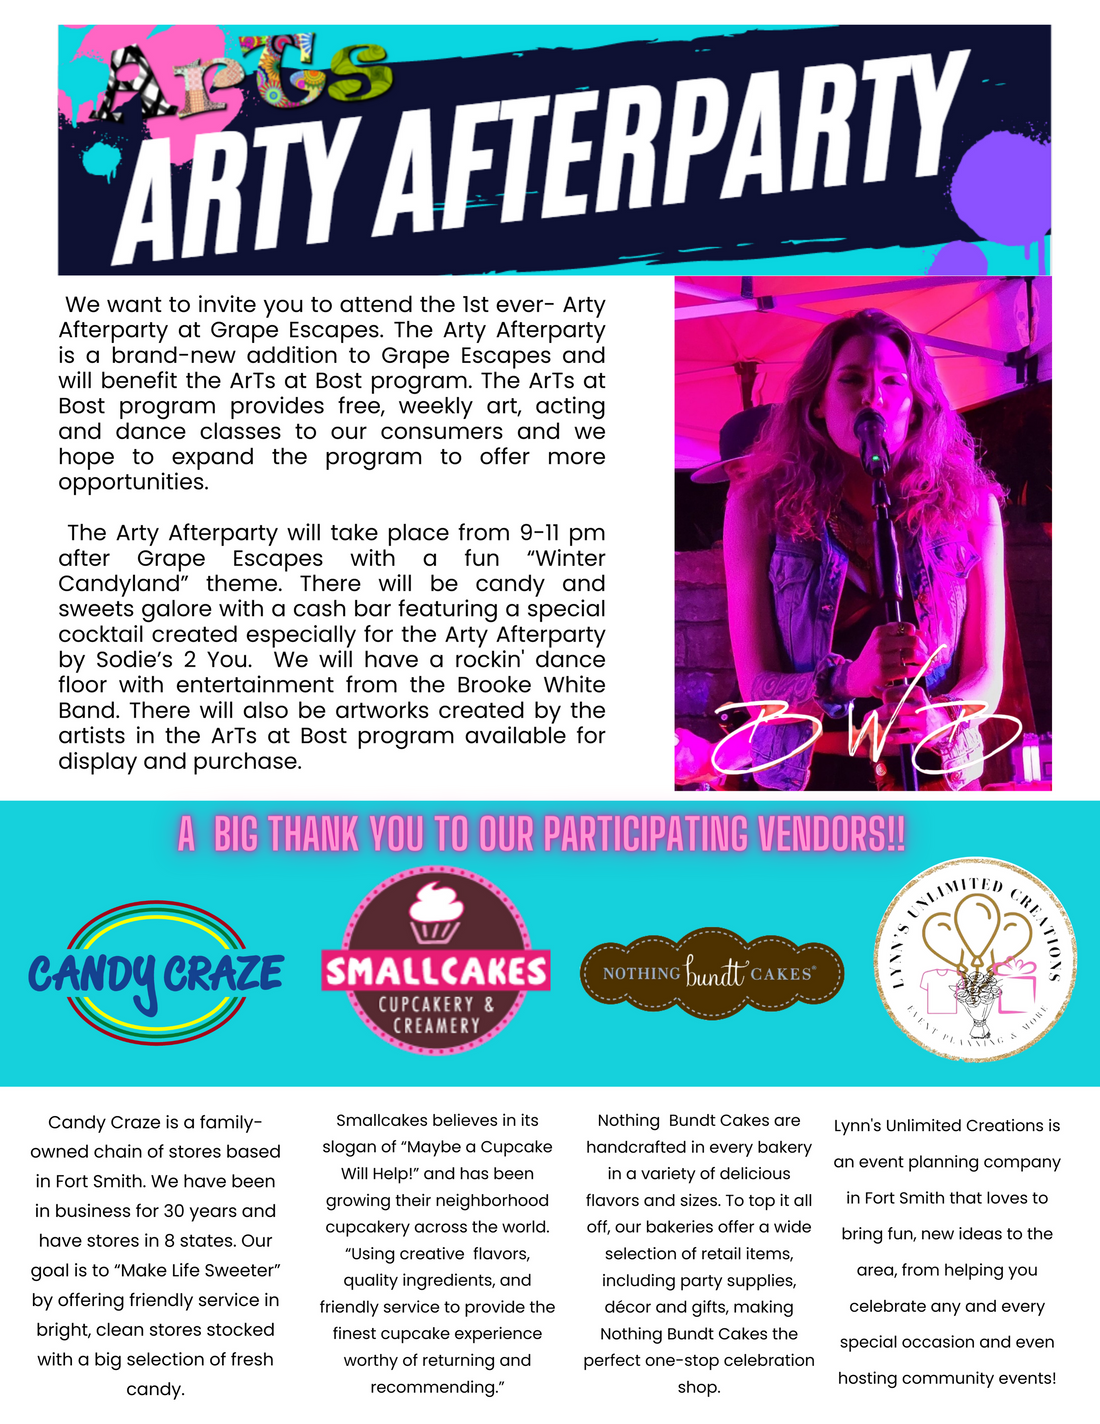 Arty Afterparty at Grape Escapes